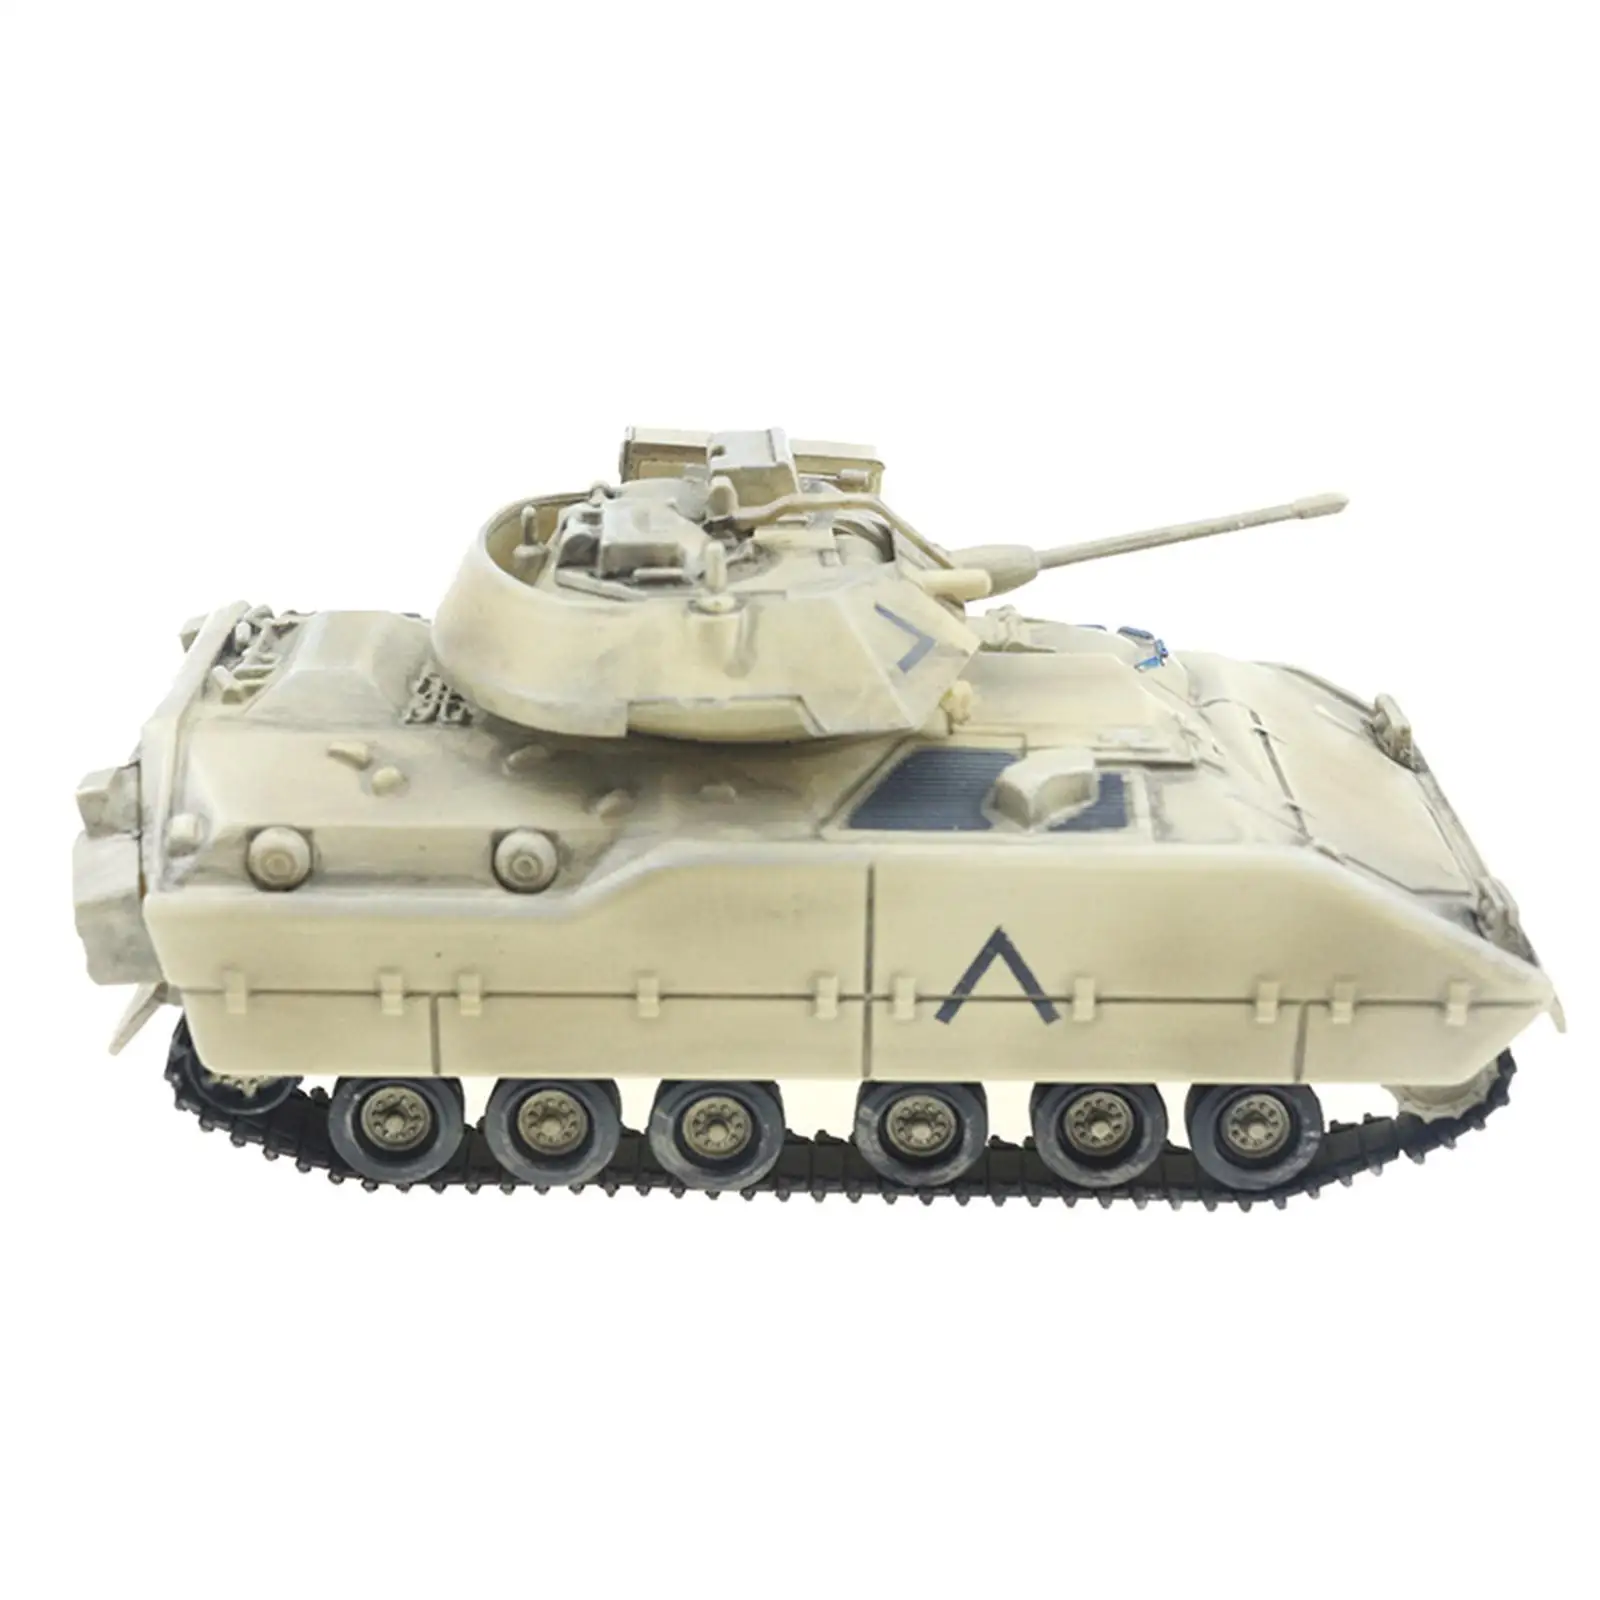 1/72 Scale Metal M2 IFV Diecast Tank Model Collecti Gifts Toys Decorati